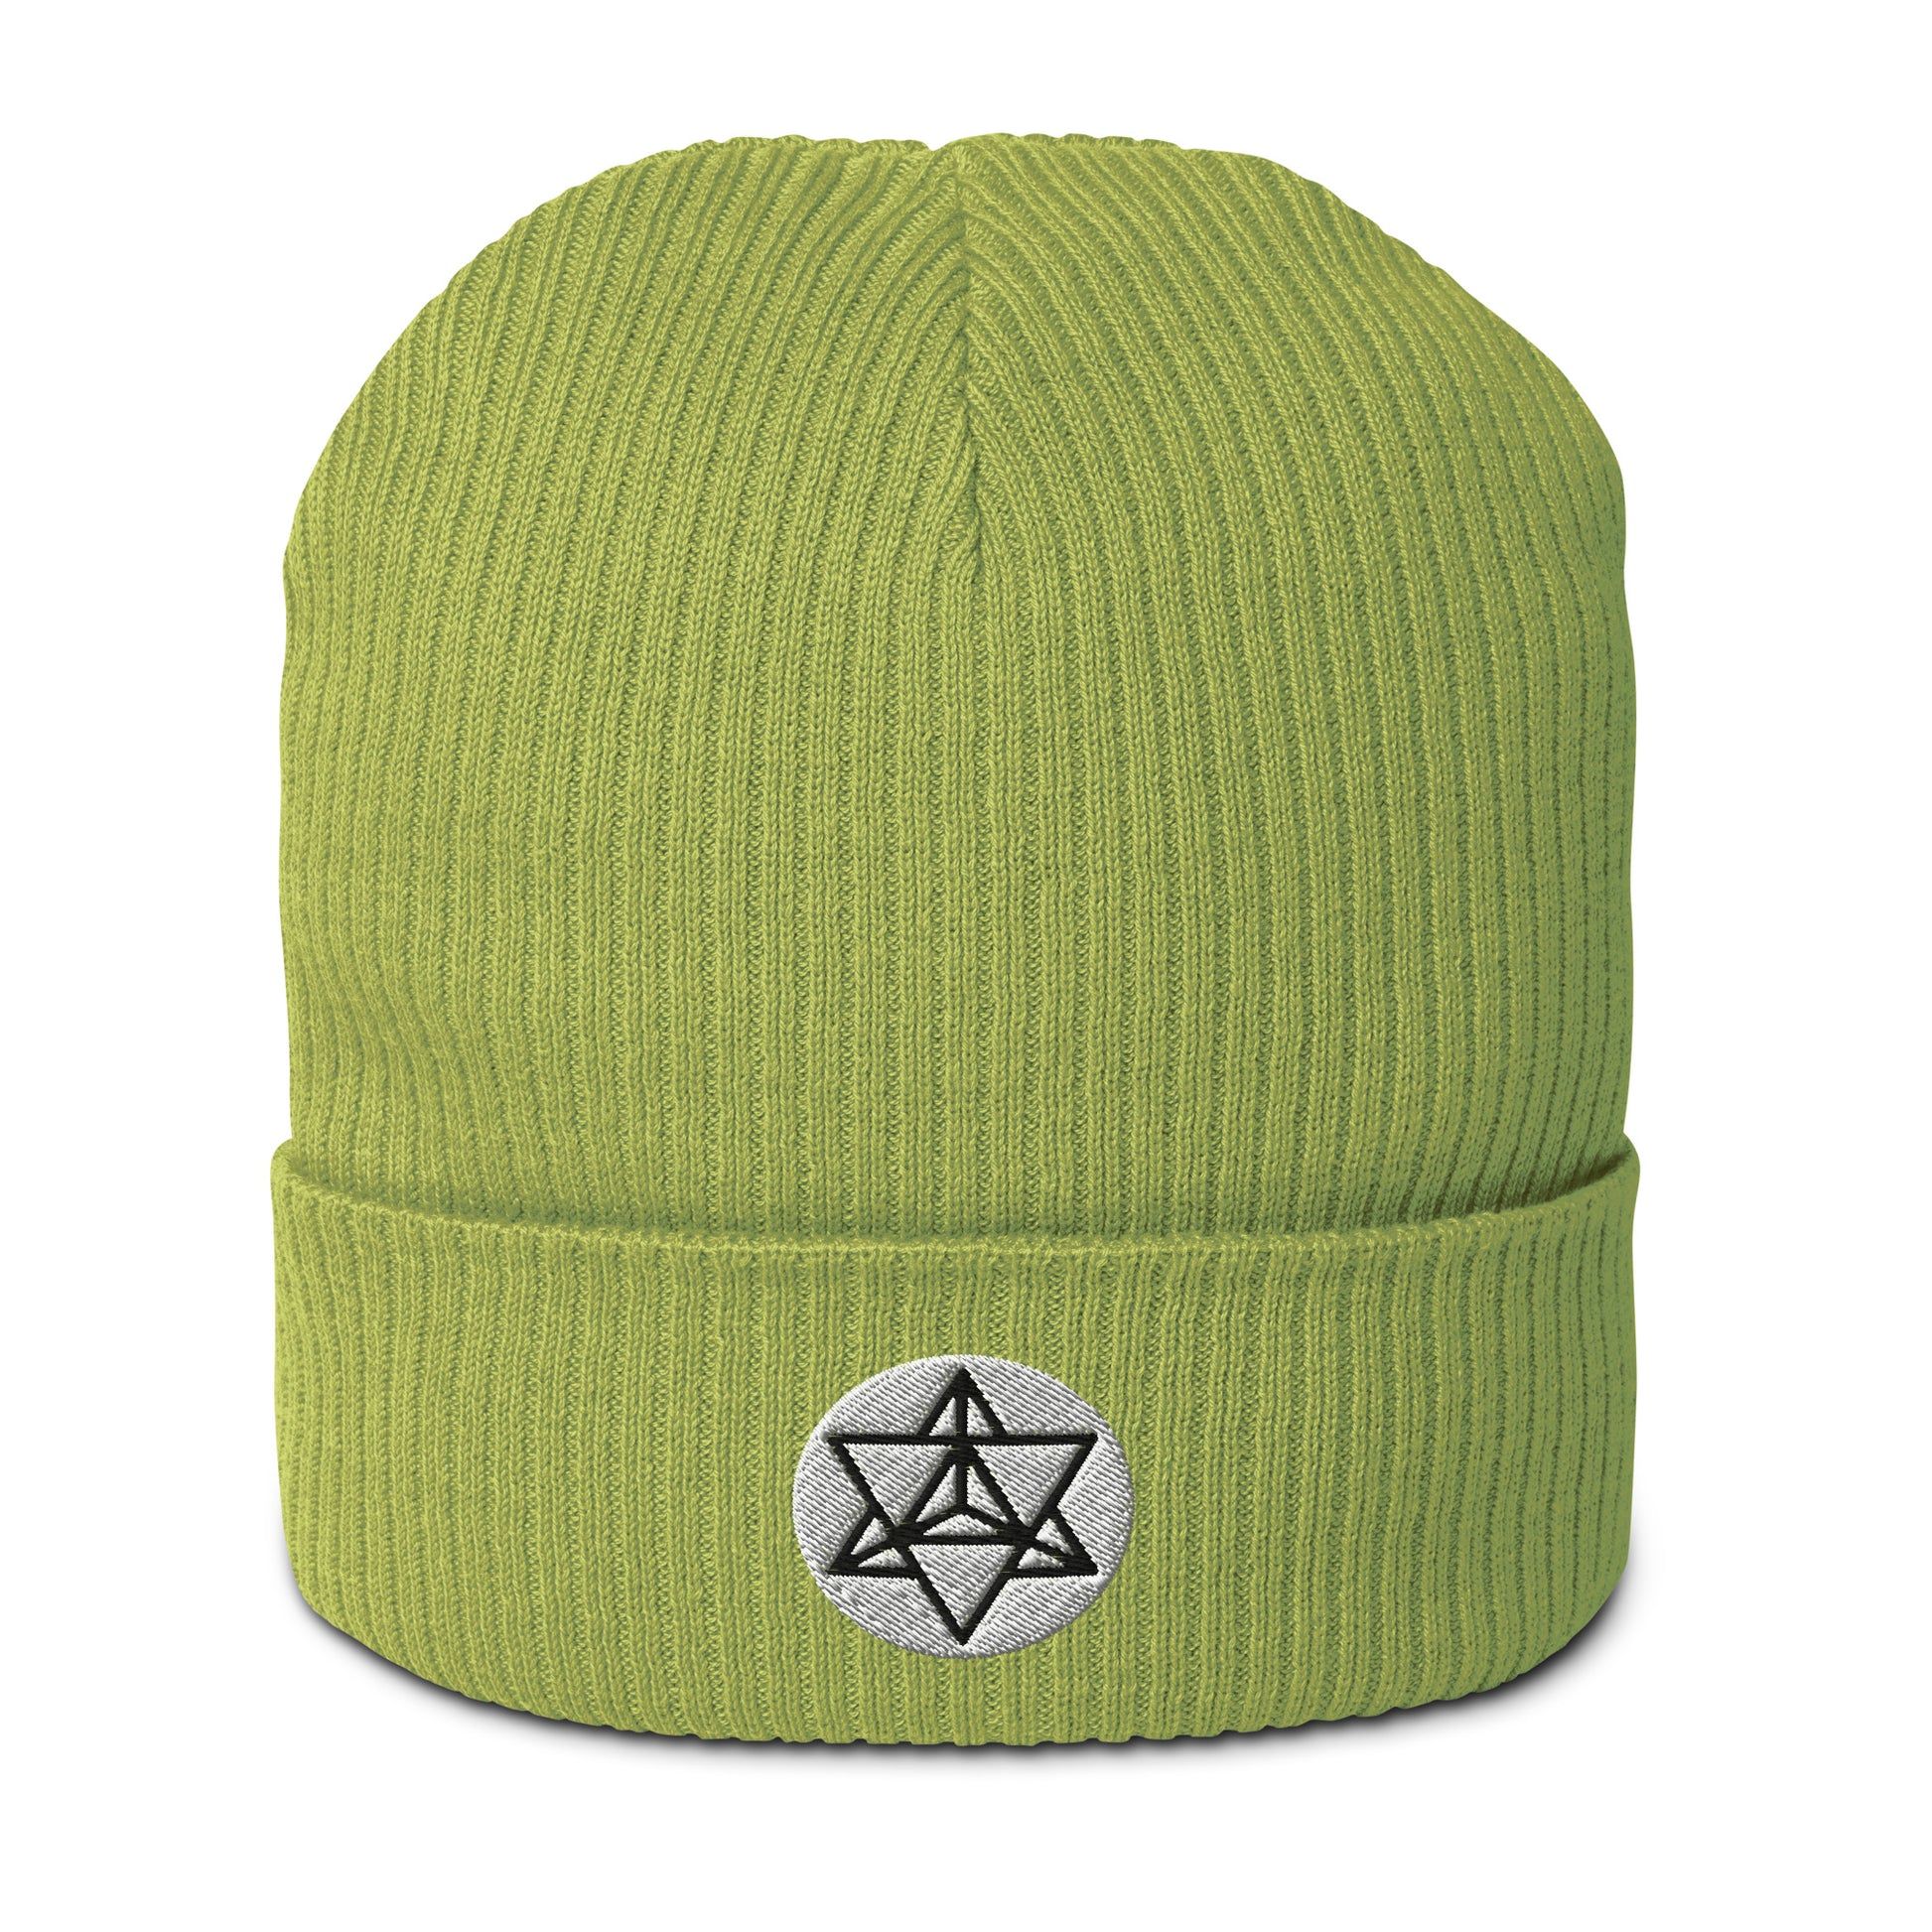 The Merkaba symbol beanie hat in Apple Green, crafted from organic cotton and adorned with intricate embroidery. Symbolizing the journey of ascension and divine protection, the Merkaba represents profound spiritual transformation and unity of mind, body, and spirit. 